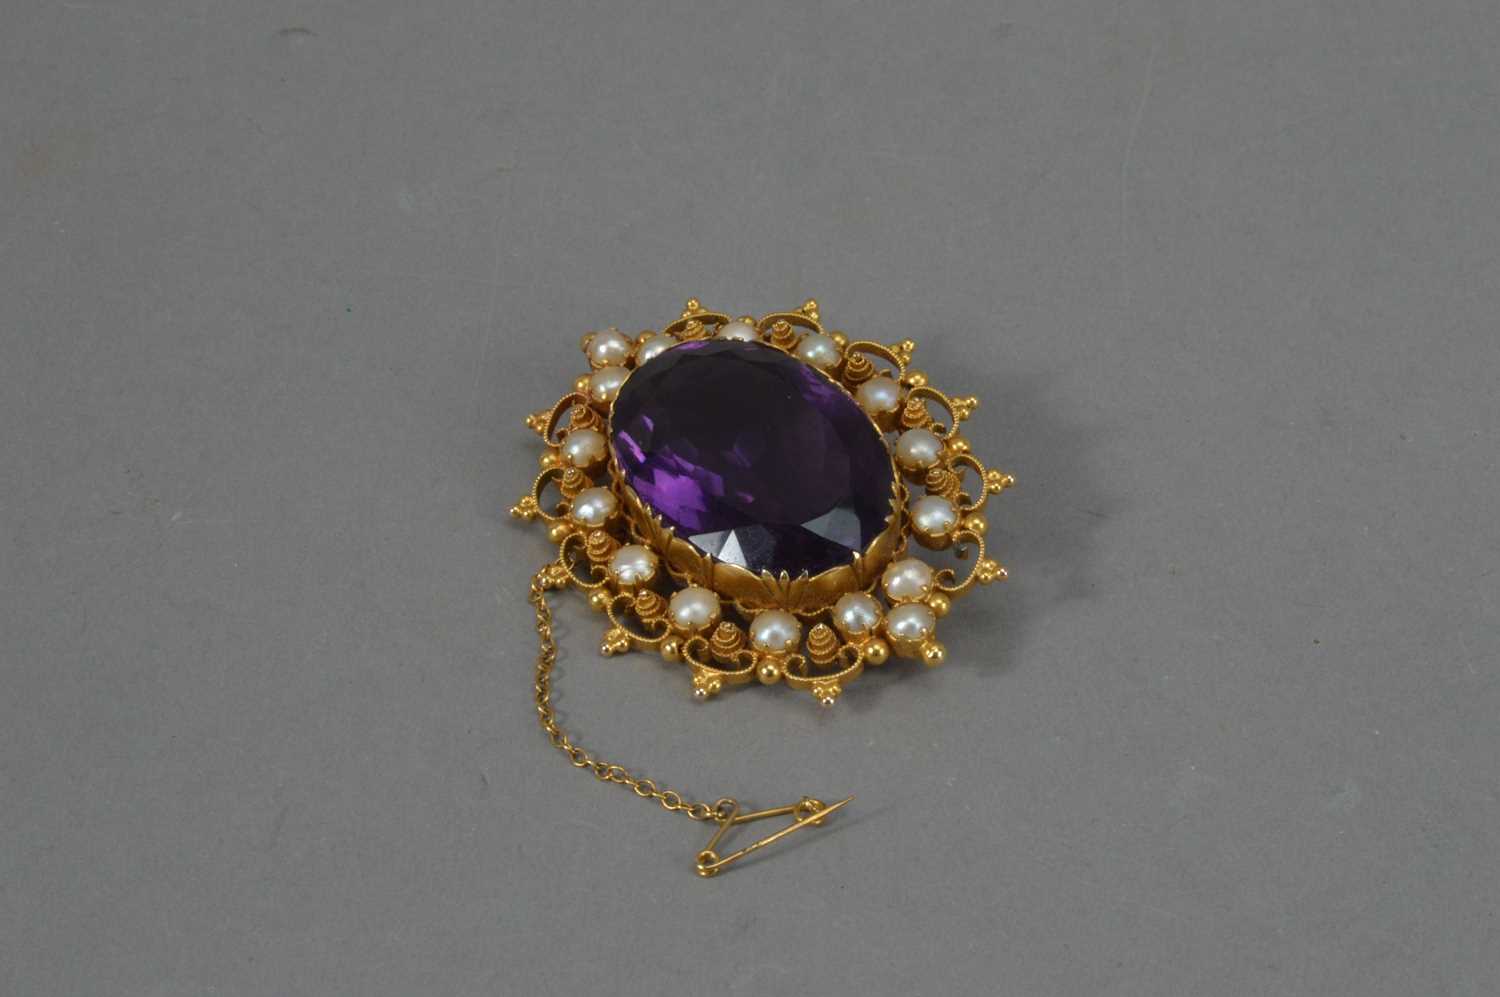 Lot 113 - An Edwardian 9ct marked yellow metal amethyst and seed pearl oval brooch